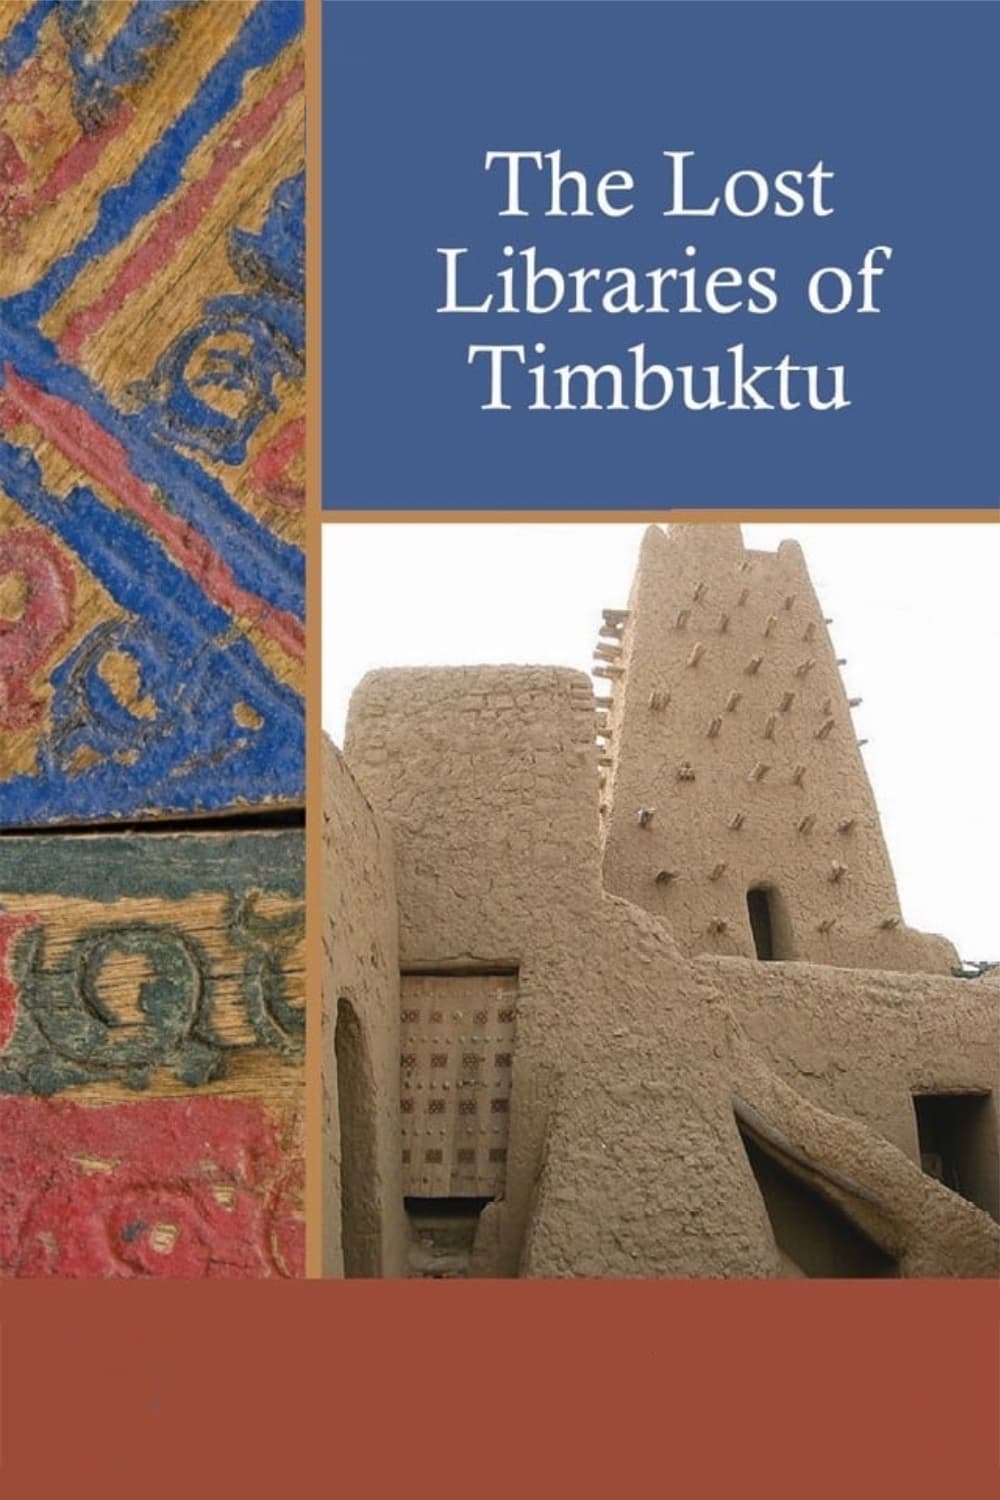 The Lost Libraries of Timbuktu